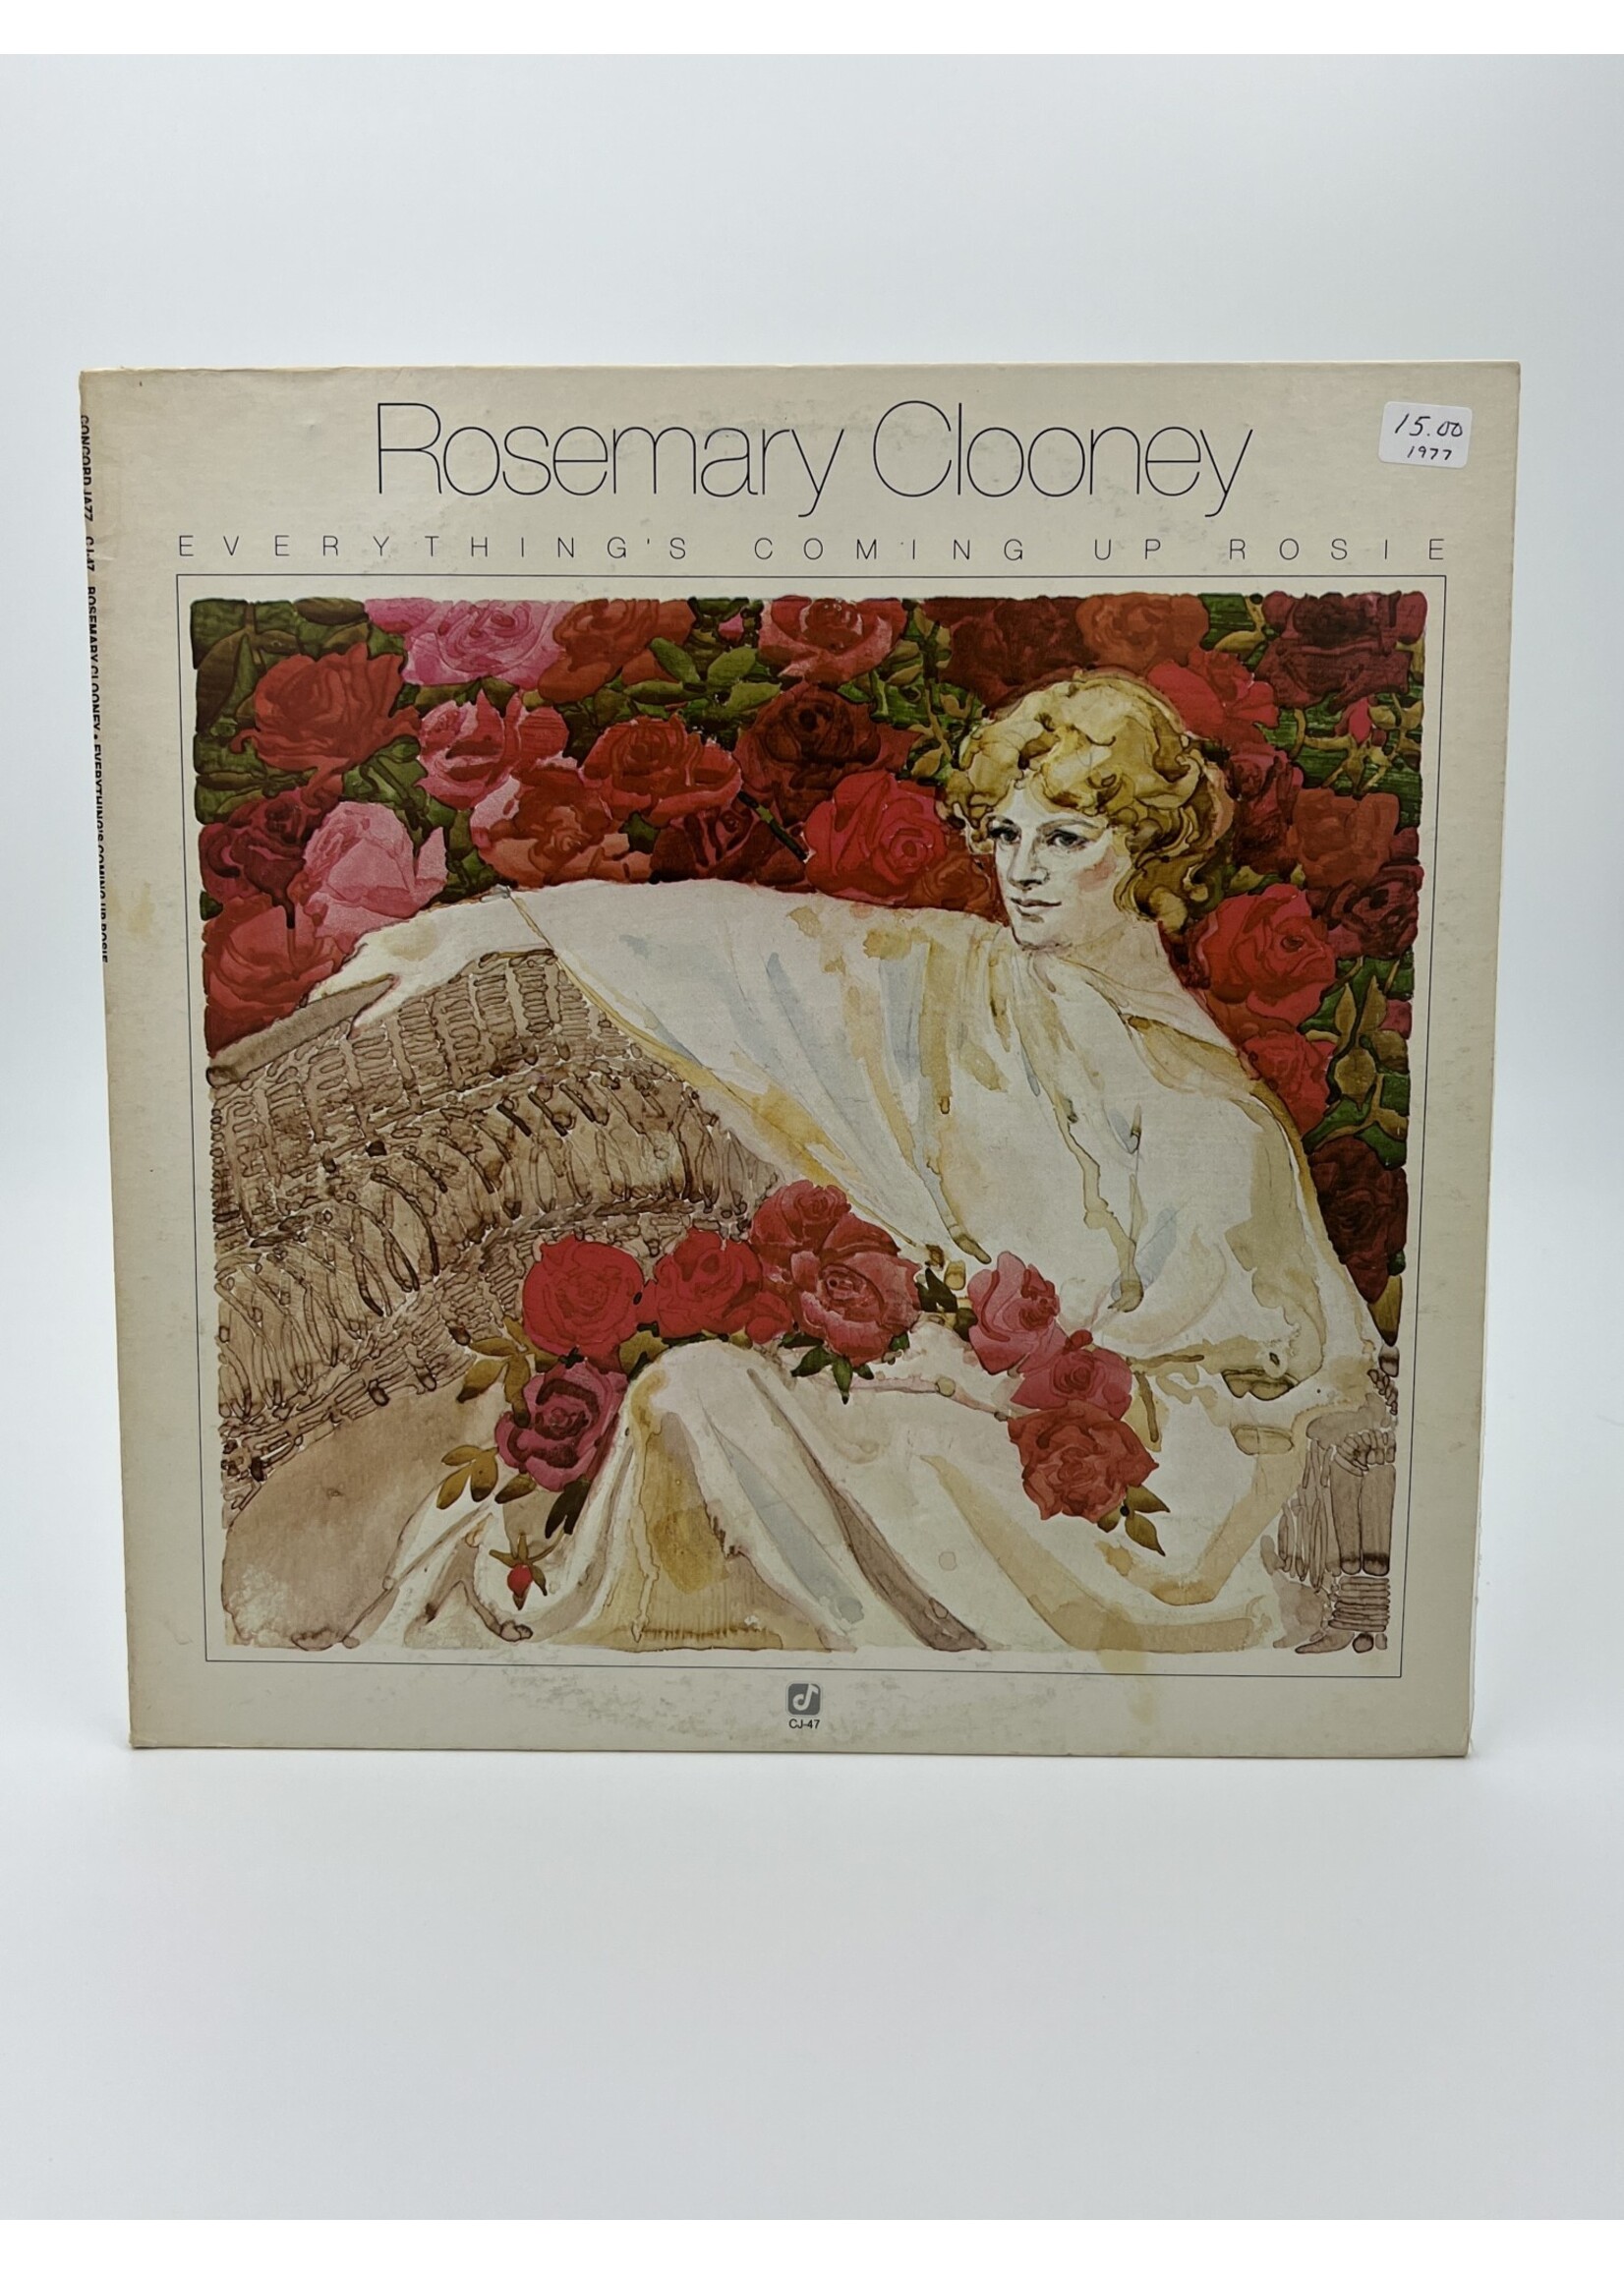 LP   Rosemary Clooney Everything Coming Up Rosie LP Record